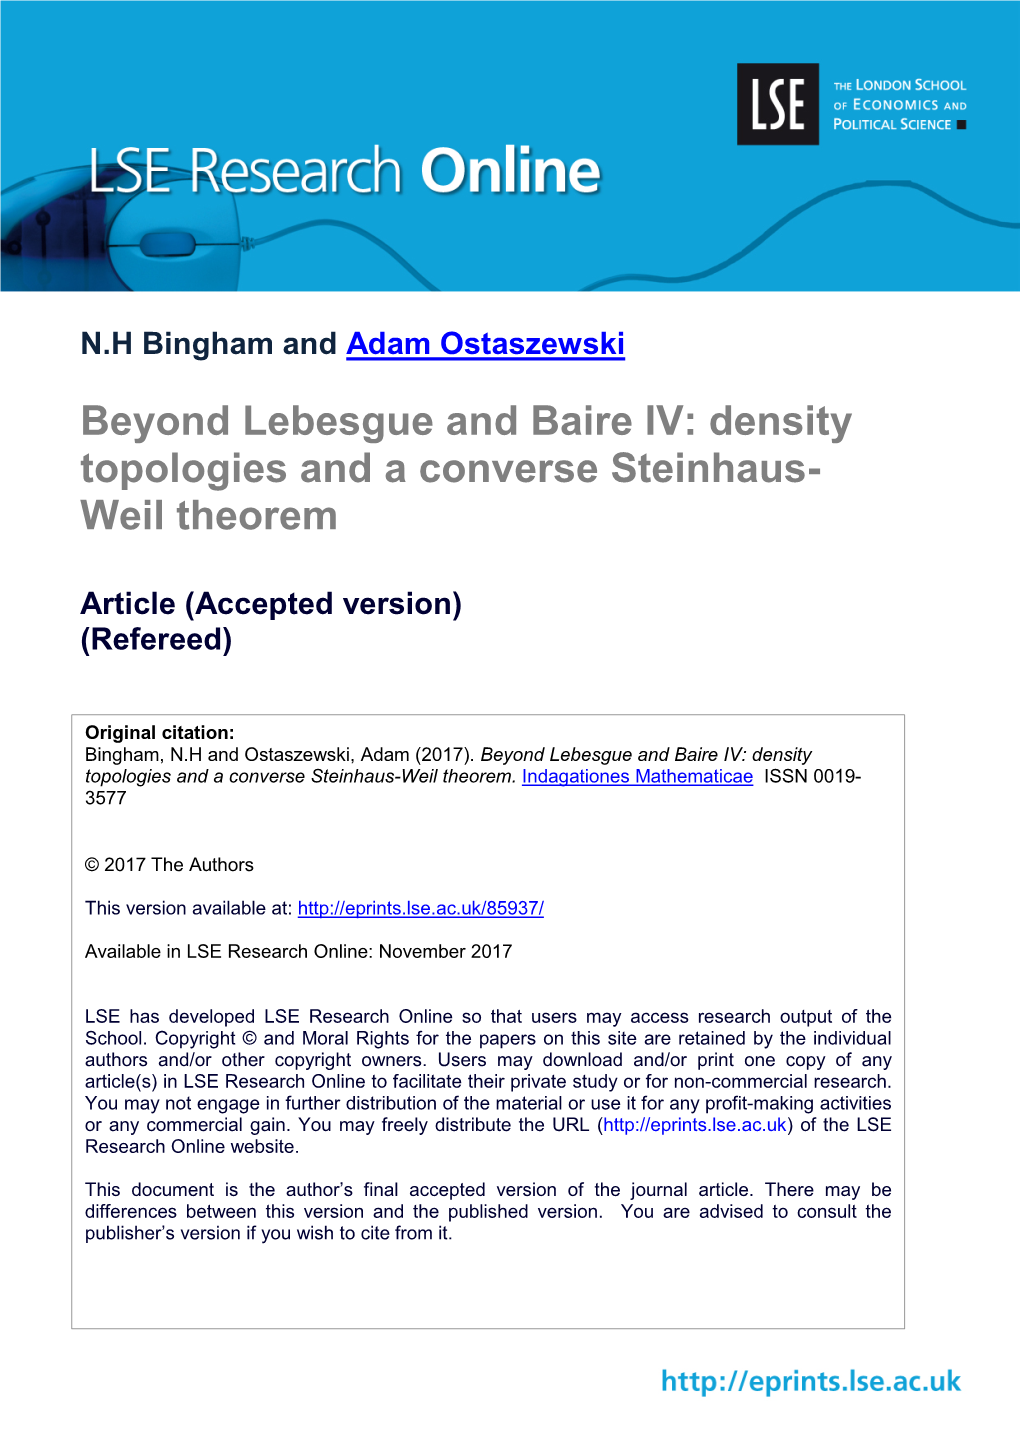 Beyond Lebesgue and Baire IV: Density Topologies and a Converse Steinhaus- Weil Theorem